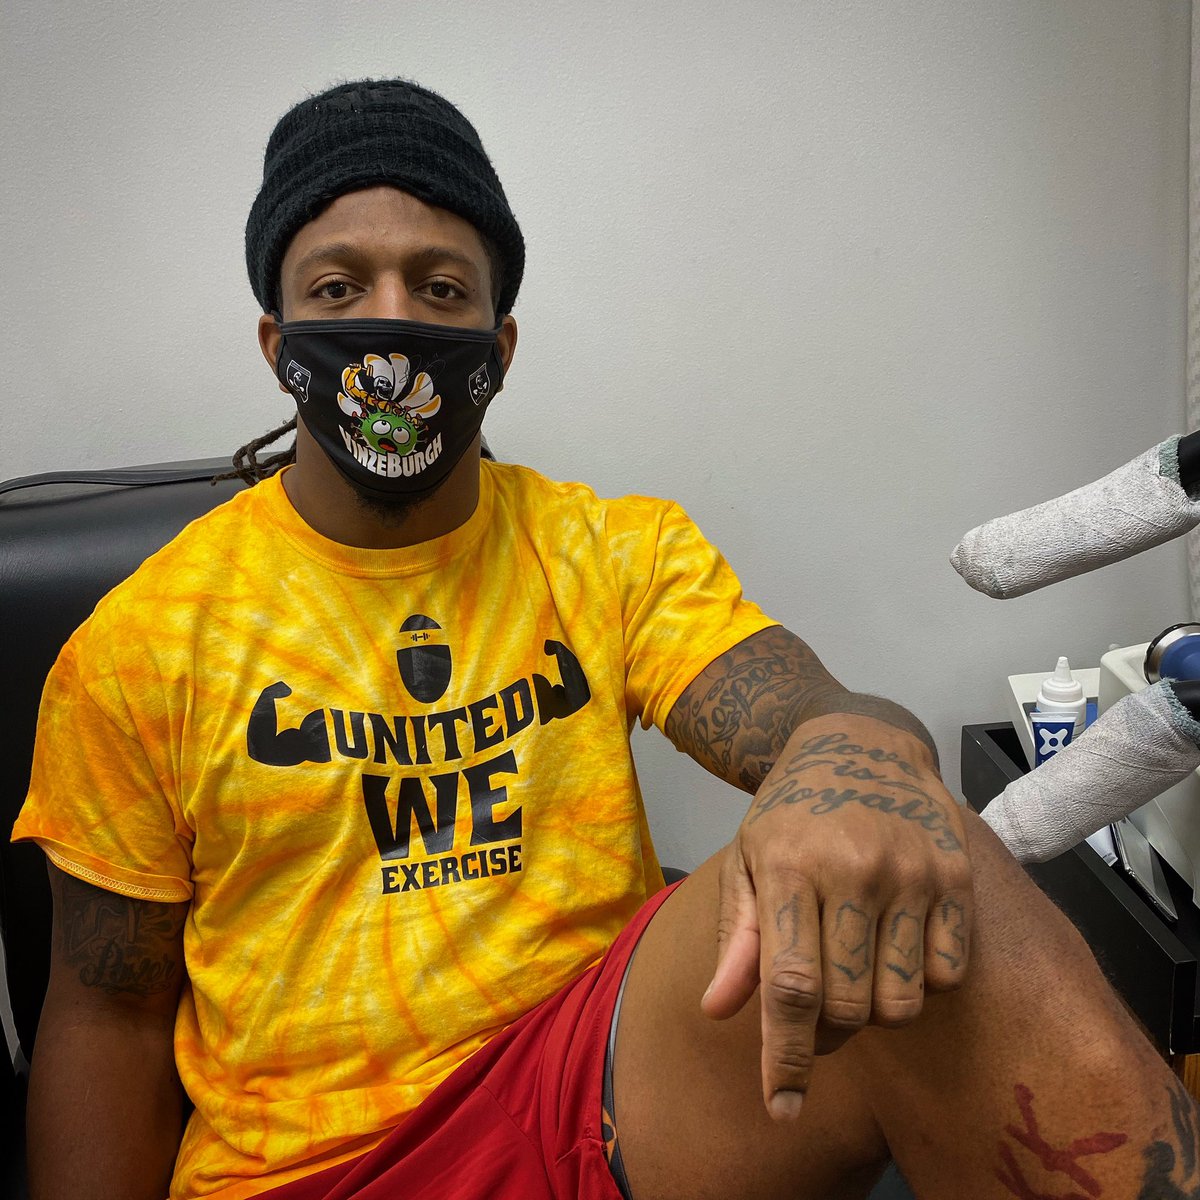 Huge shoutout to the @Bud_Dupree for rocking the UWE gear while working in Rehab. Big guy your comeback will be epic! @TakeoSpikes51 @GeorgeFoster72 #UnitedWeExercise #pittsburghsteelers #nfl #personaltrainer #strengthandconditioning #strengthandconditioningcoach #football